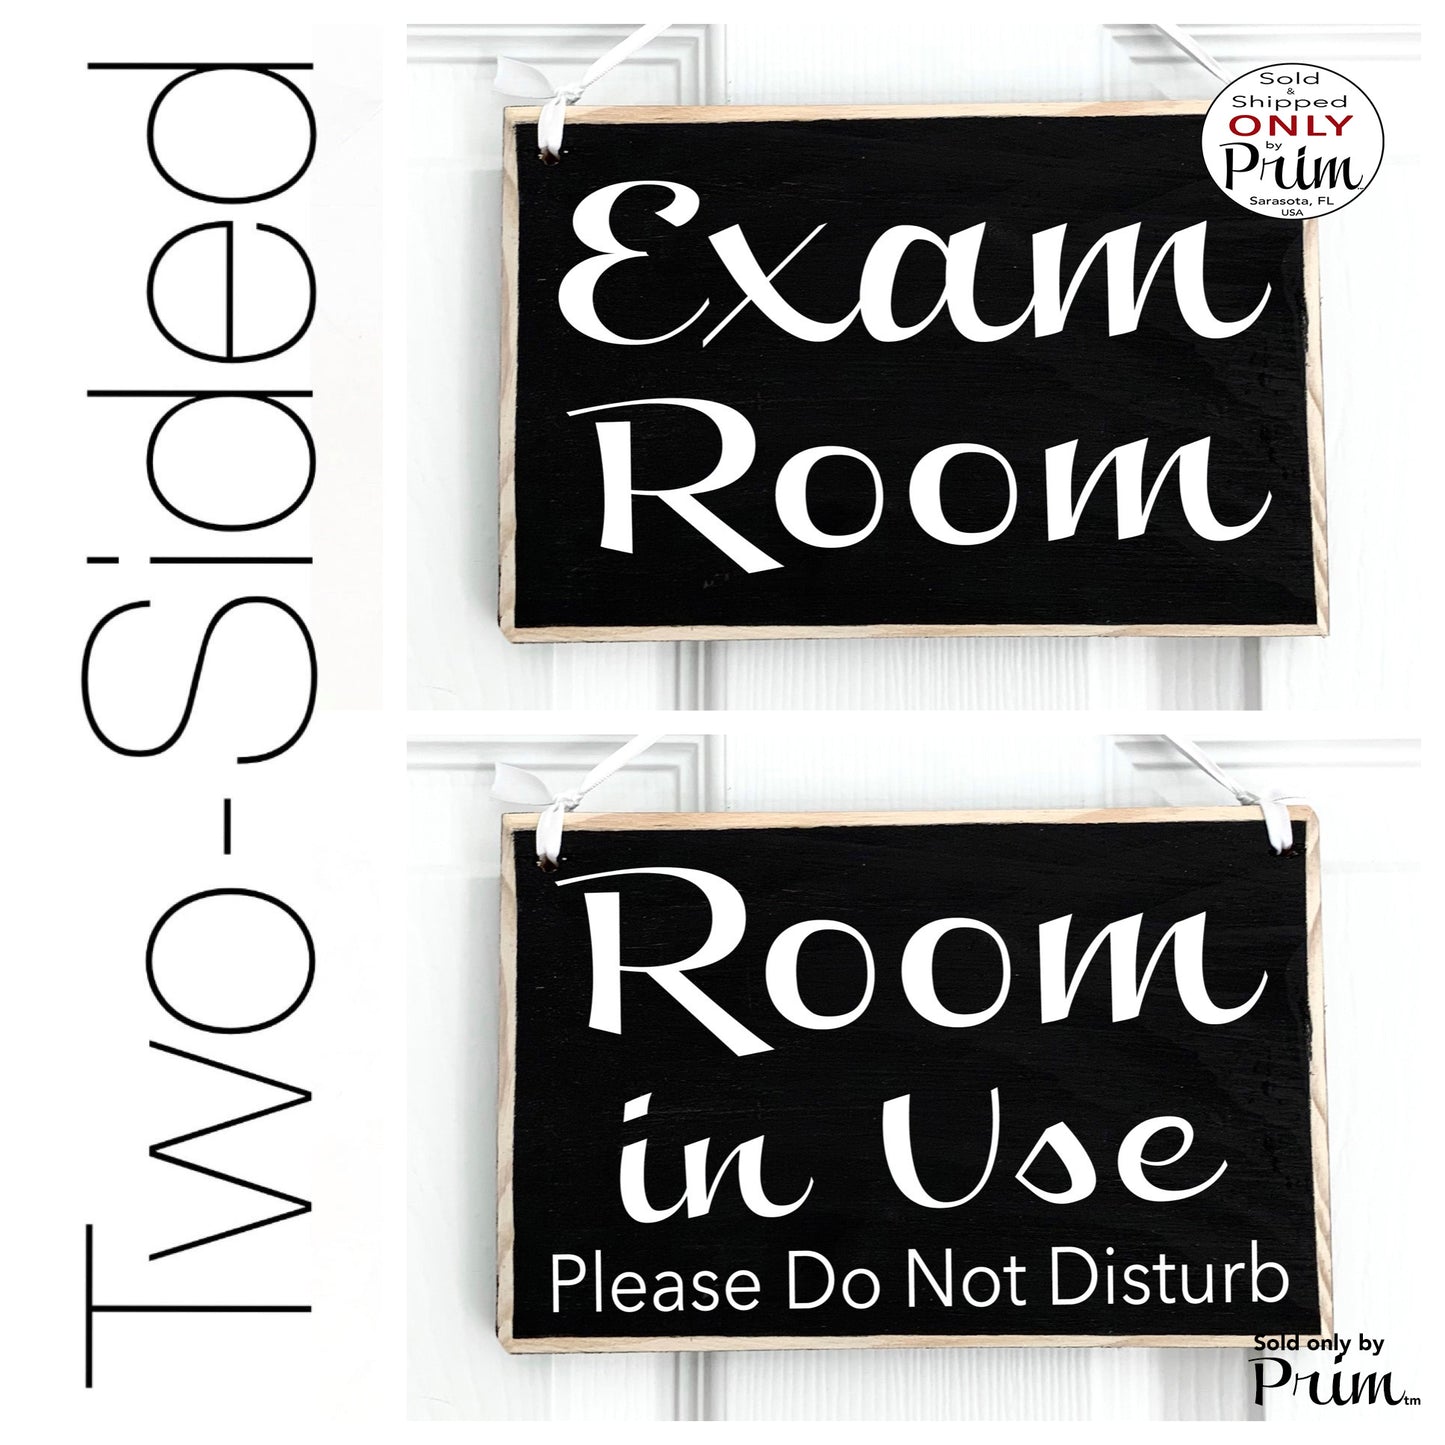 Designs by Prim 8x6 Exam Room In Use Pleases Do Not Disturb Custom Wood Sign Vacant Occupied Doctors Office Examination Available Wall Door Hanger Plaque